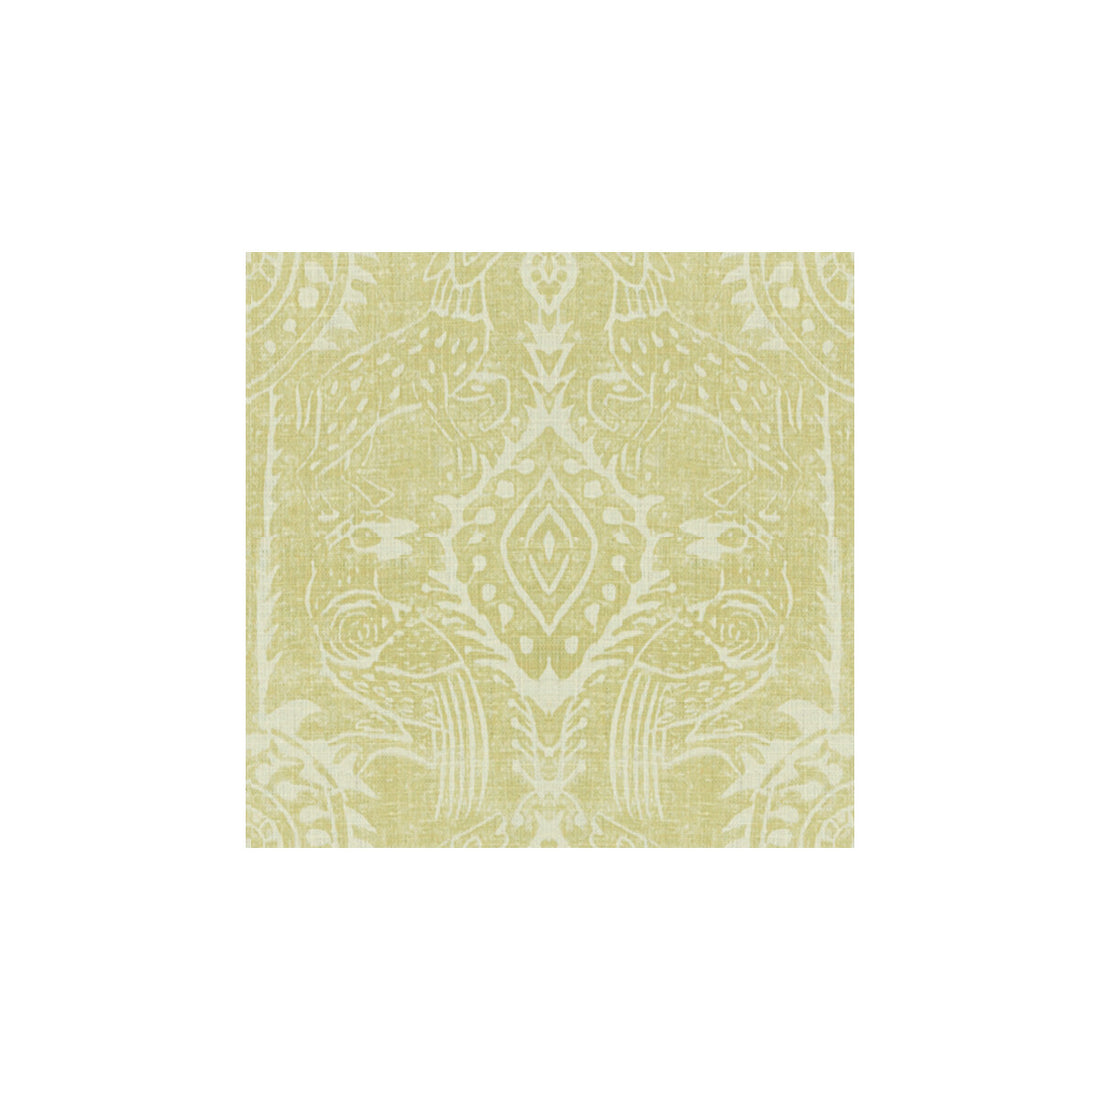 Beasties fabric in lime color - pattern BFC-3512.23.0 - by Lee Jofa in the Blithfield collection